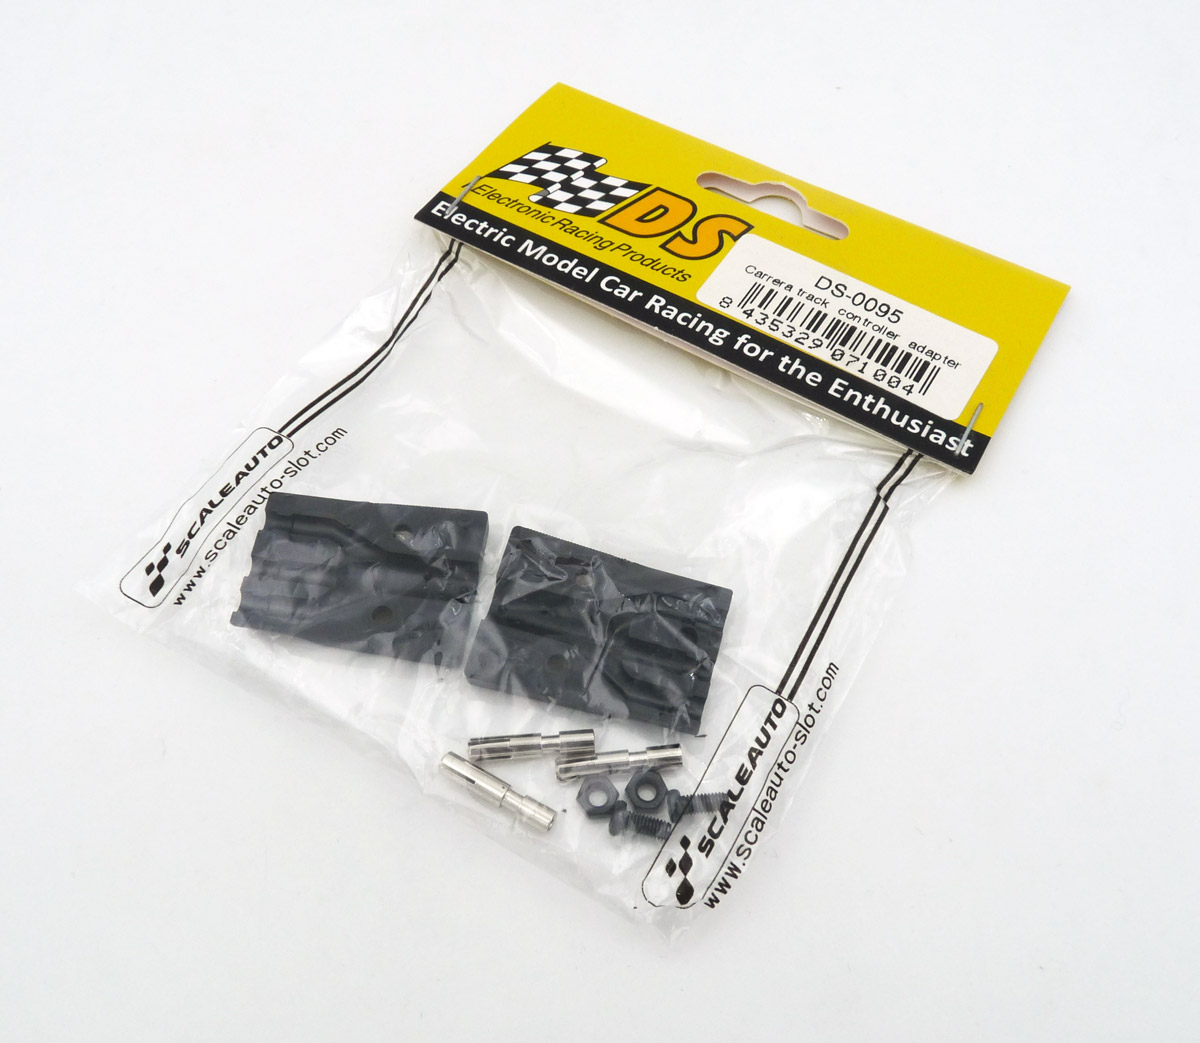 ds-electronic-racing-products-DS-0095-Adapterstecker-Handregler-System-Carrera